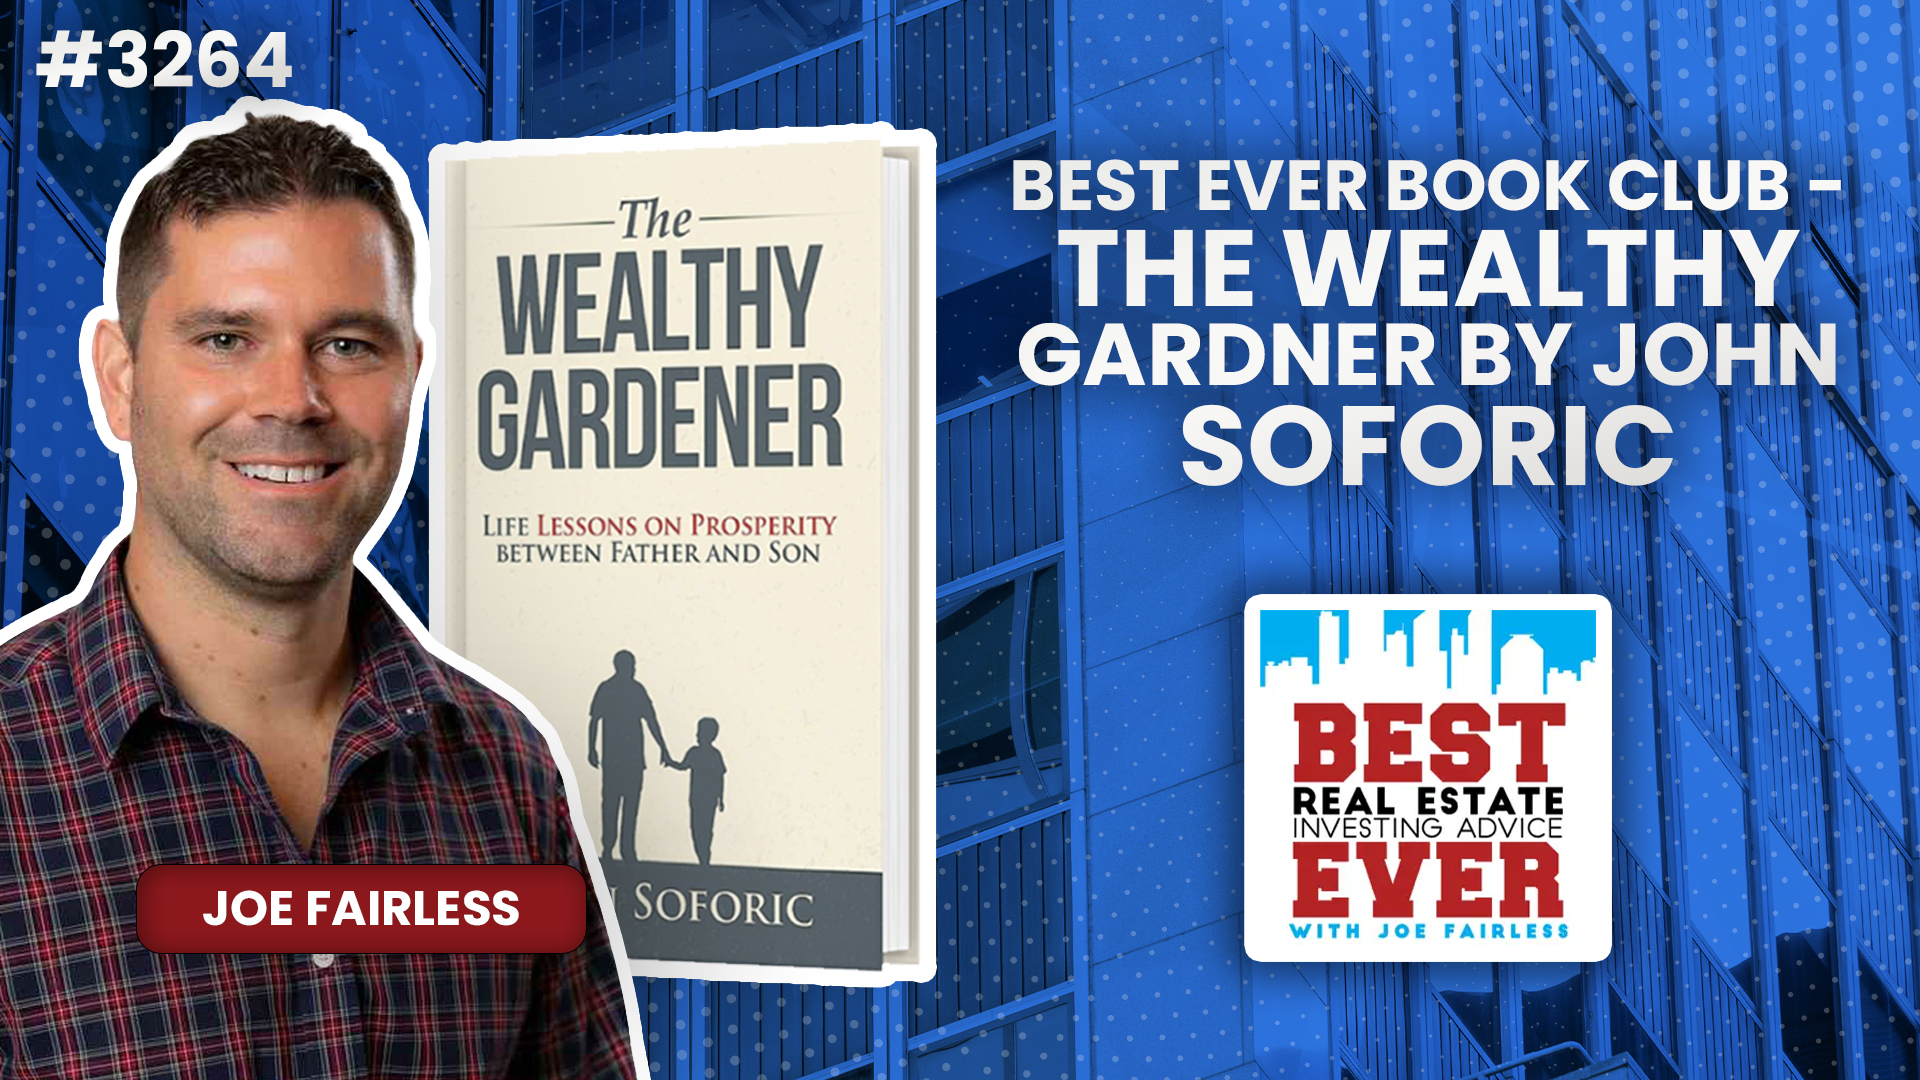 JF3264: Best Ever Book Club - The Wealthy Gardner by John Soforic